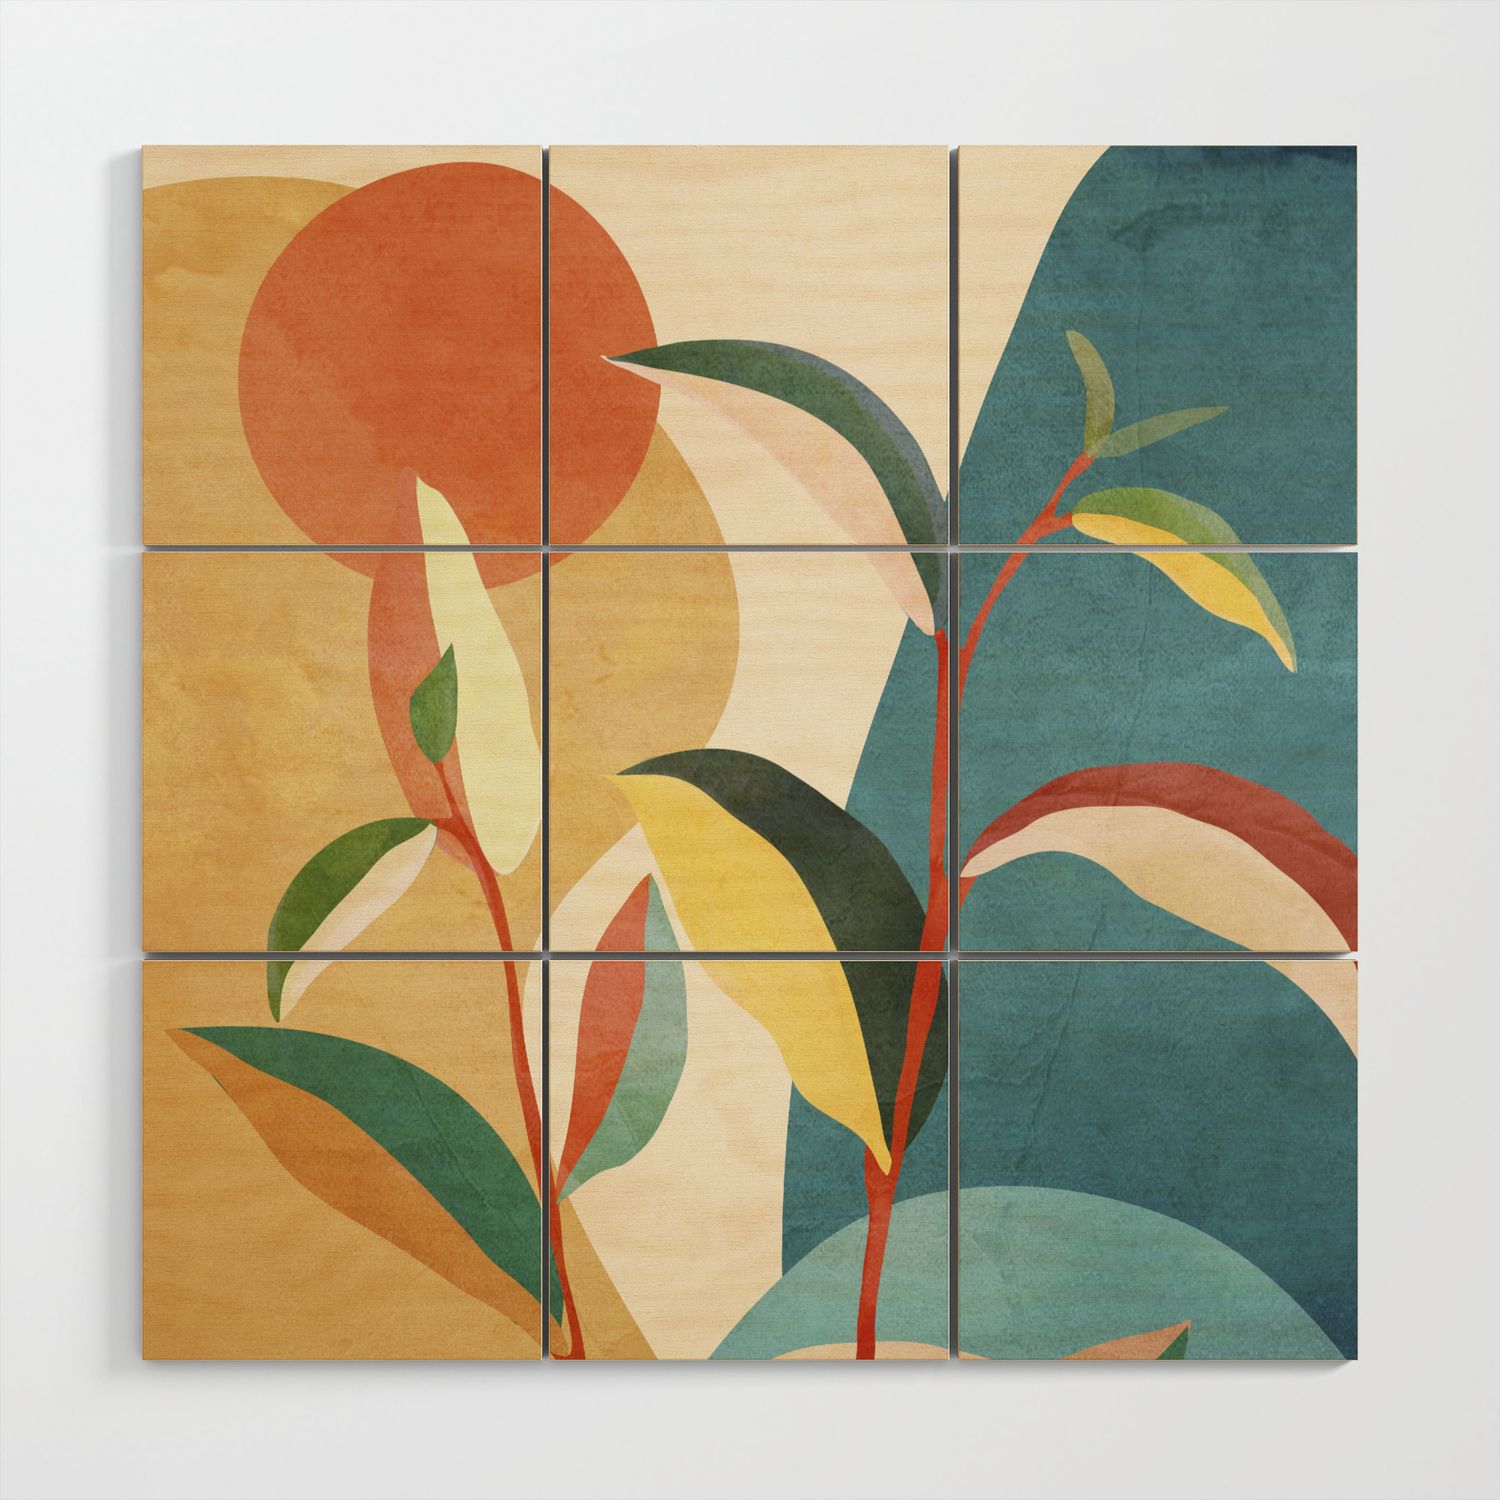 Colorful Branching Out 16 Wood Wall Artcity Art | Society6 With Most Recently Released Colorful Branching Wall Art (View 6 of 20)